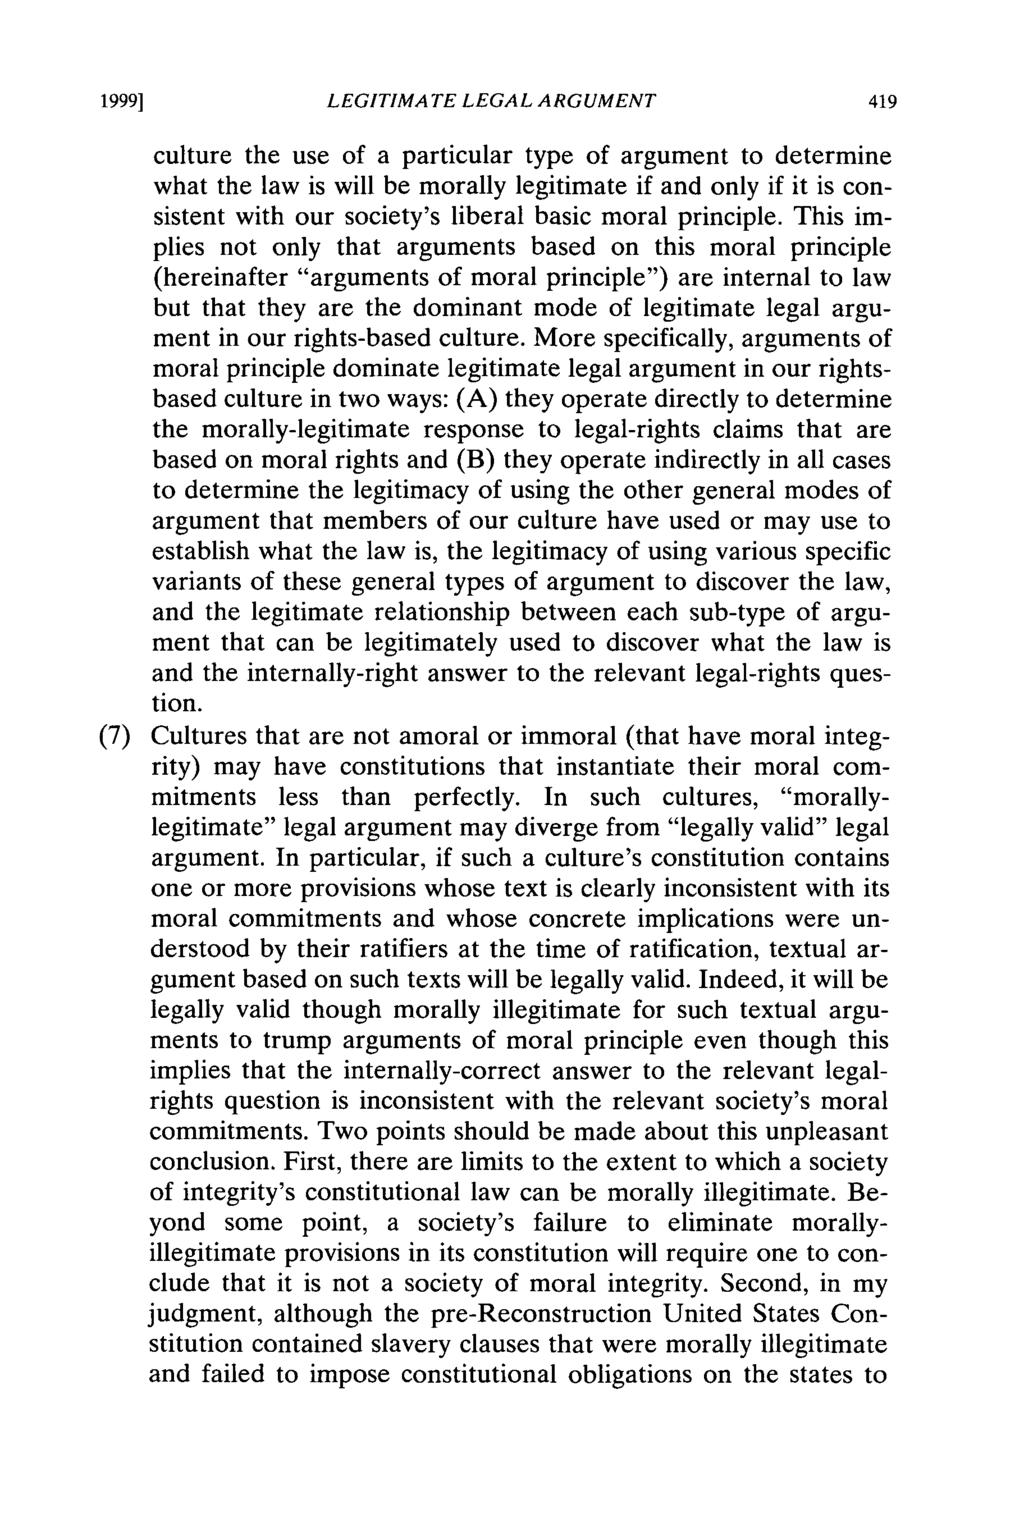 1999] LEGITIMATE LEGAL ARGUMENT culture the use of a particular type of argument to determine what the law is will be morally legitimate if and only if it is consistent with our society's liberal